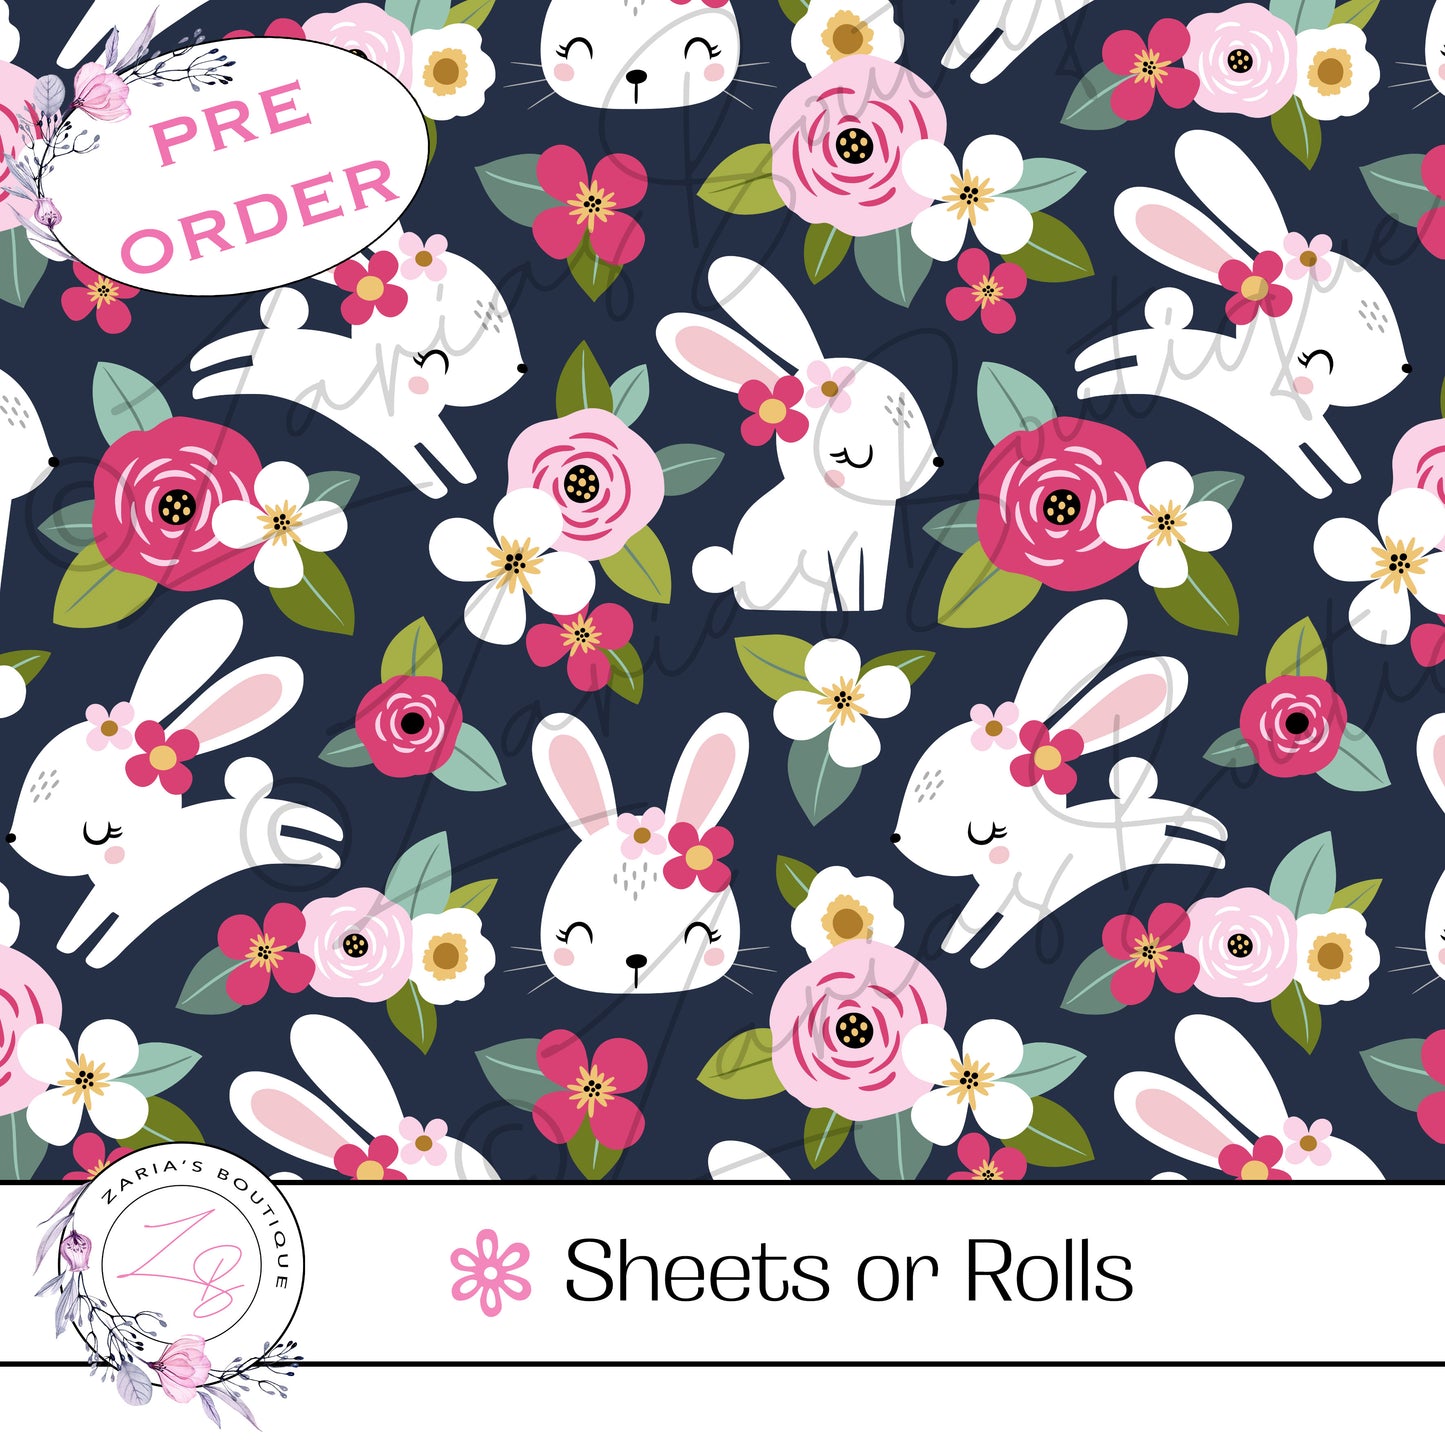 ⋅ Playful Bunnies ⋅ Custom Luxe Vegan Faux Leather ⋅ Sheets or Rolls! ⋅